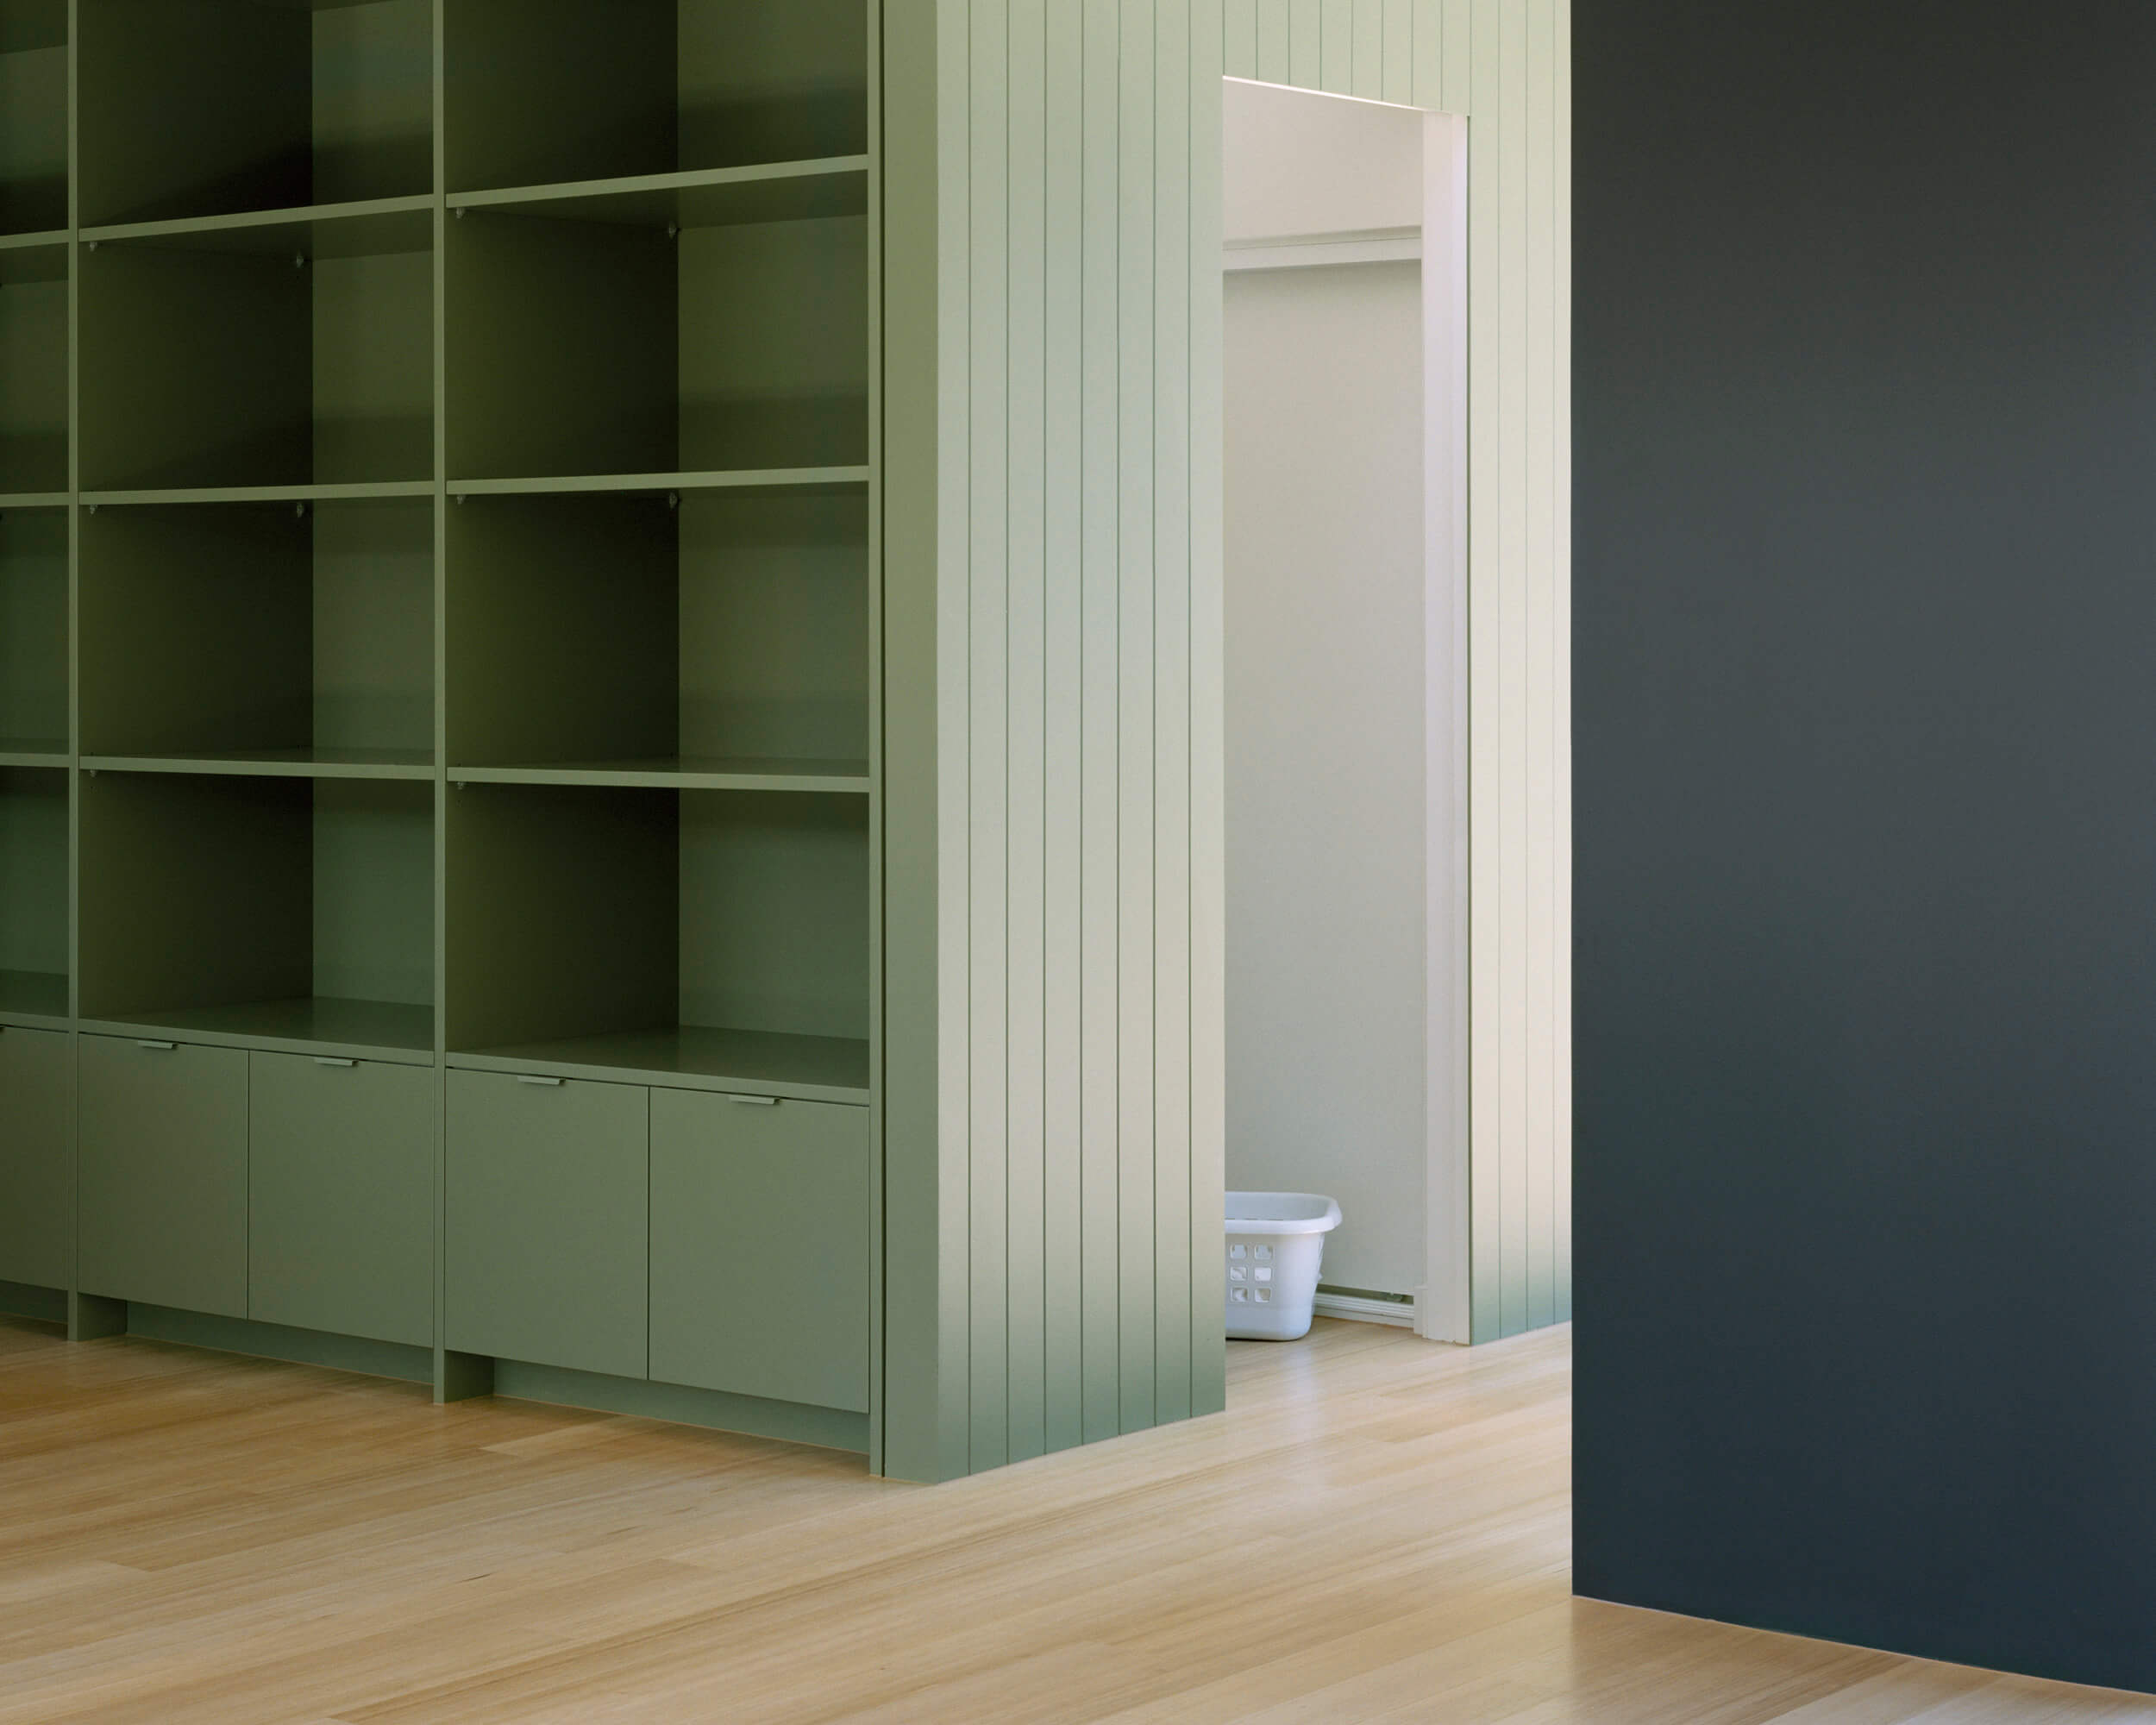 Olive Green Joinery. Ellul Architecture. Sandringham House